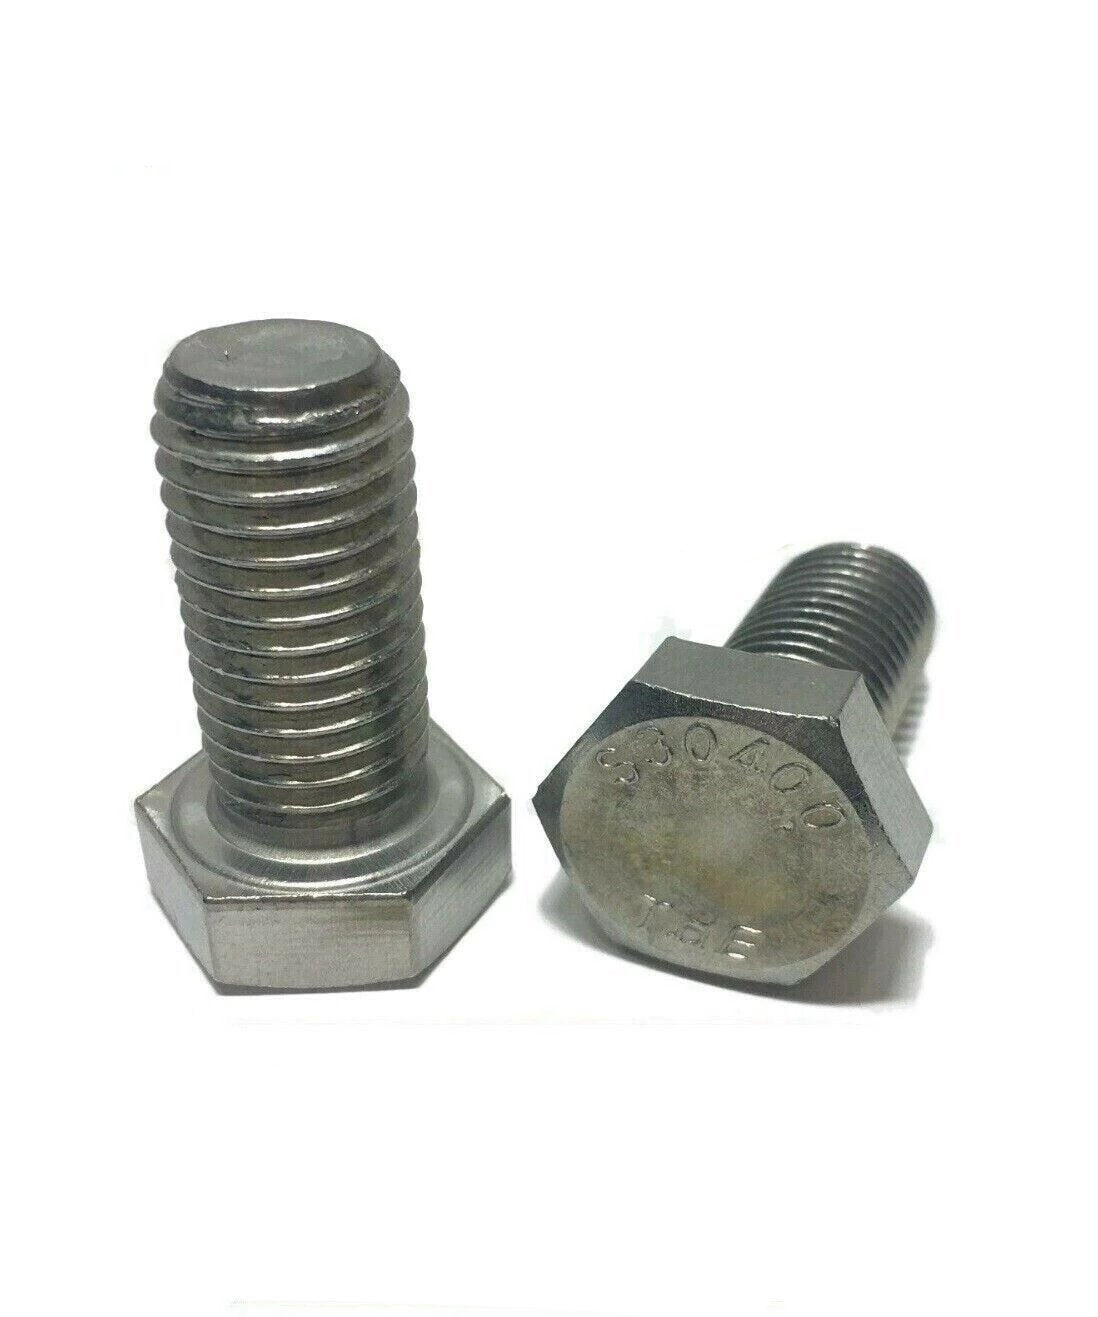 1/2"-13 x 1-1/2" StaInless Steel Hex Cap Screw / Tap Bolt 18-8 / 304